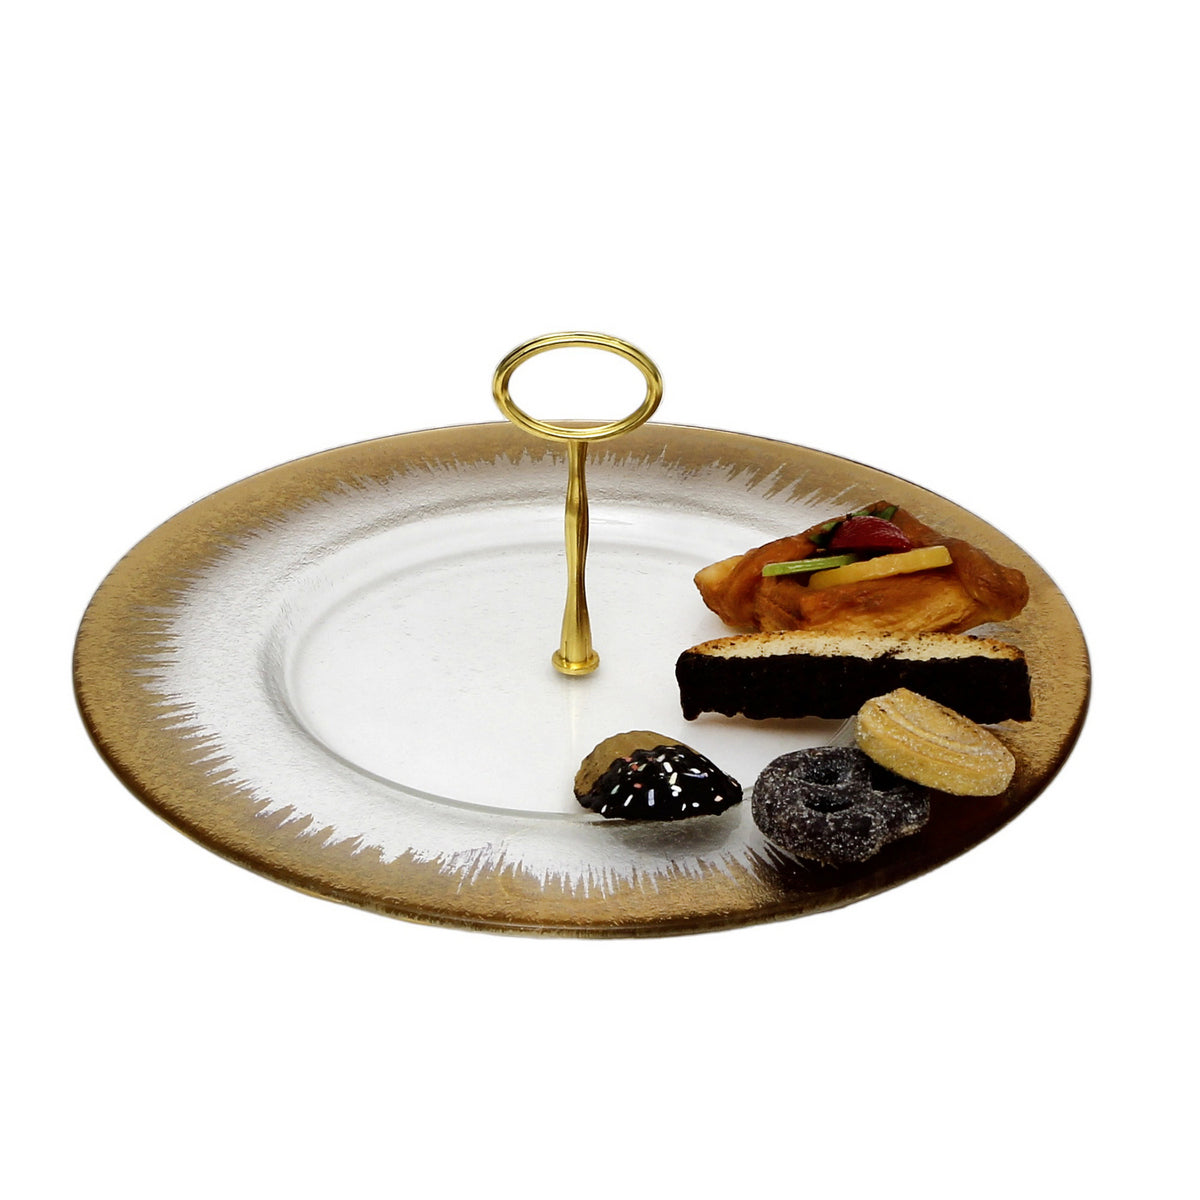 IVV GLASS ORIZZONTTE: Tid Bit Server Charger Plate with Golden or Chrome Oval Metal Handle - Artistica.com